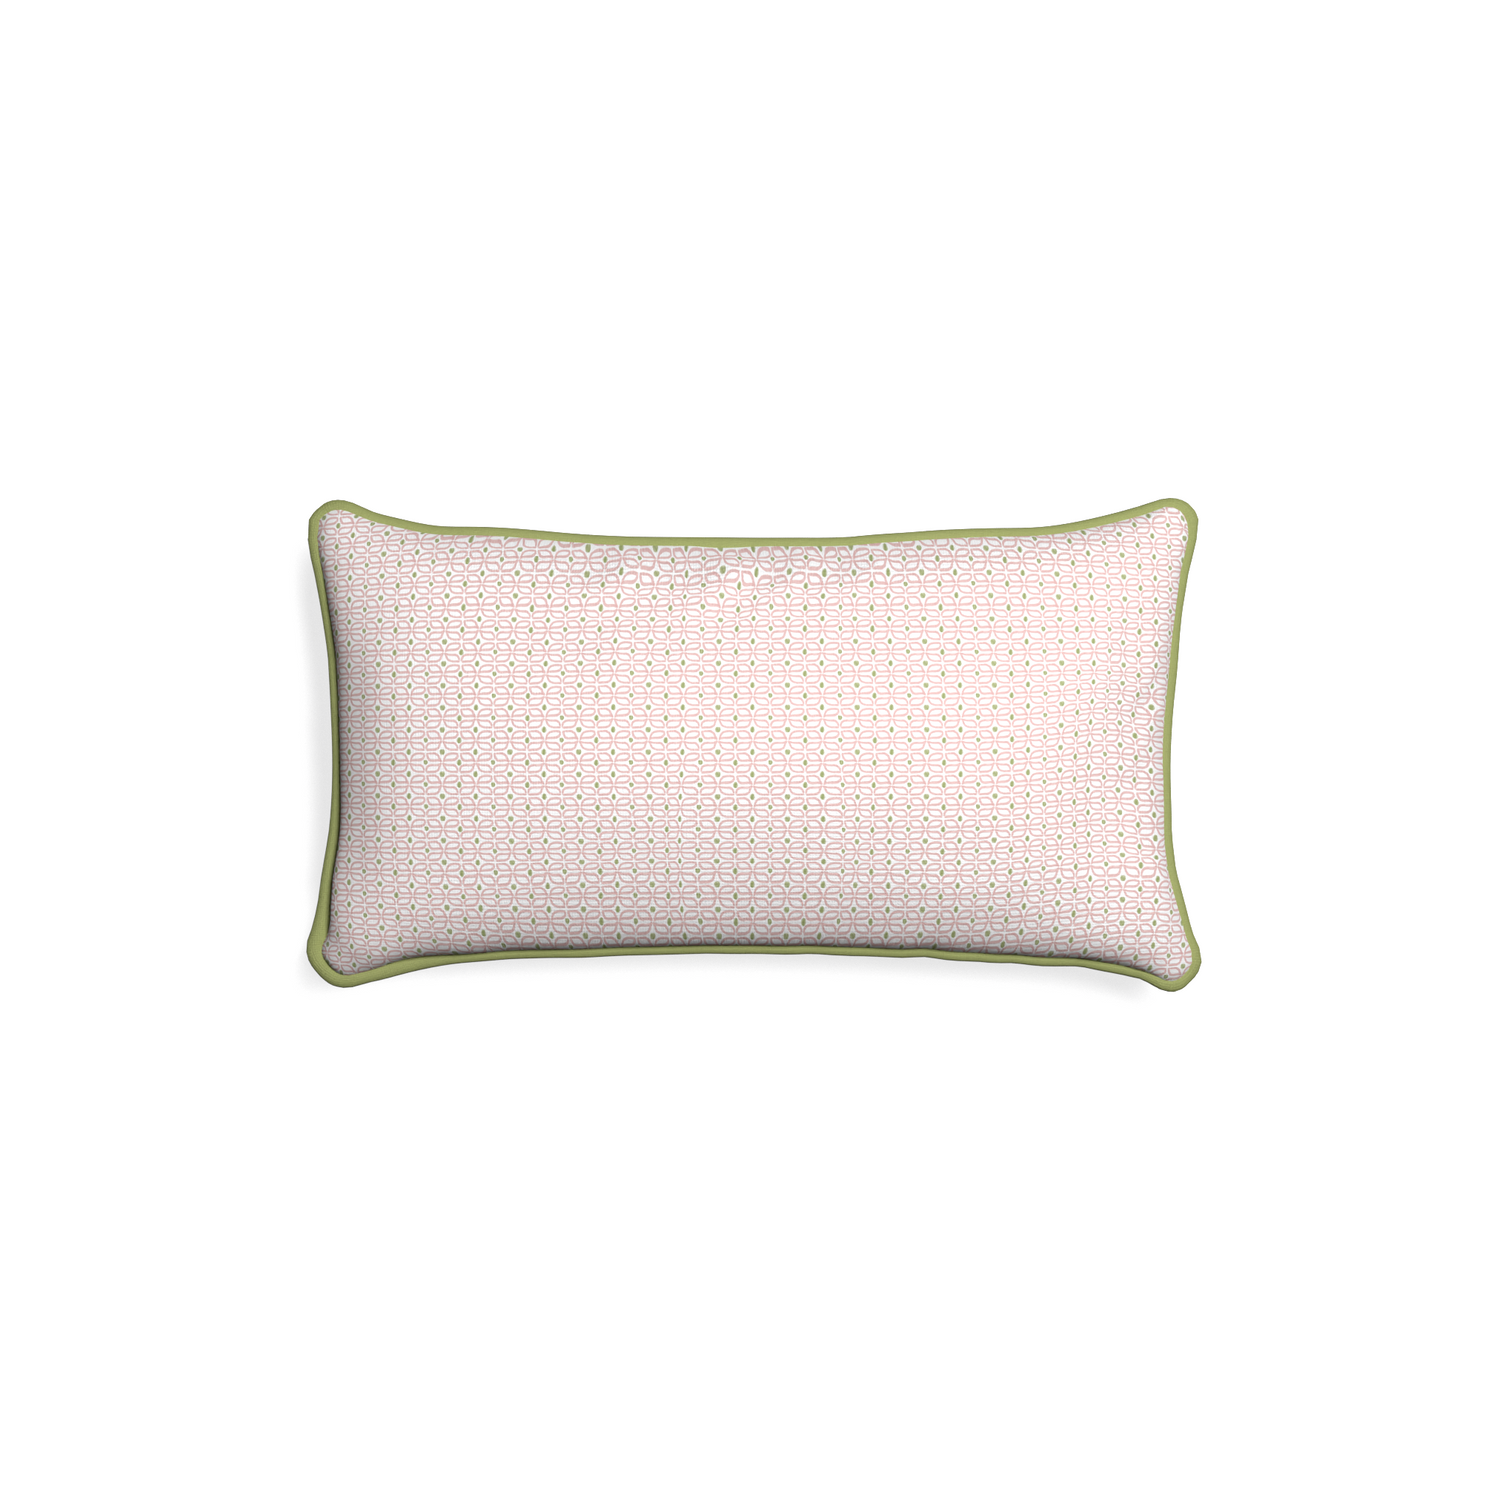 Petite-lumbar loomi pink custom pink geometricpillow with moss piping on white background